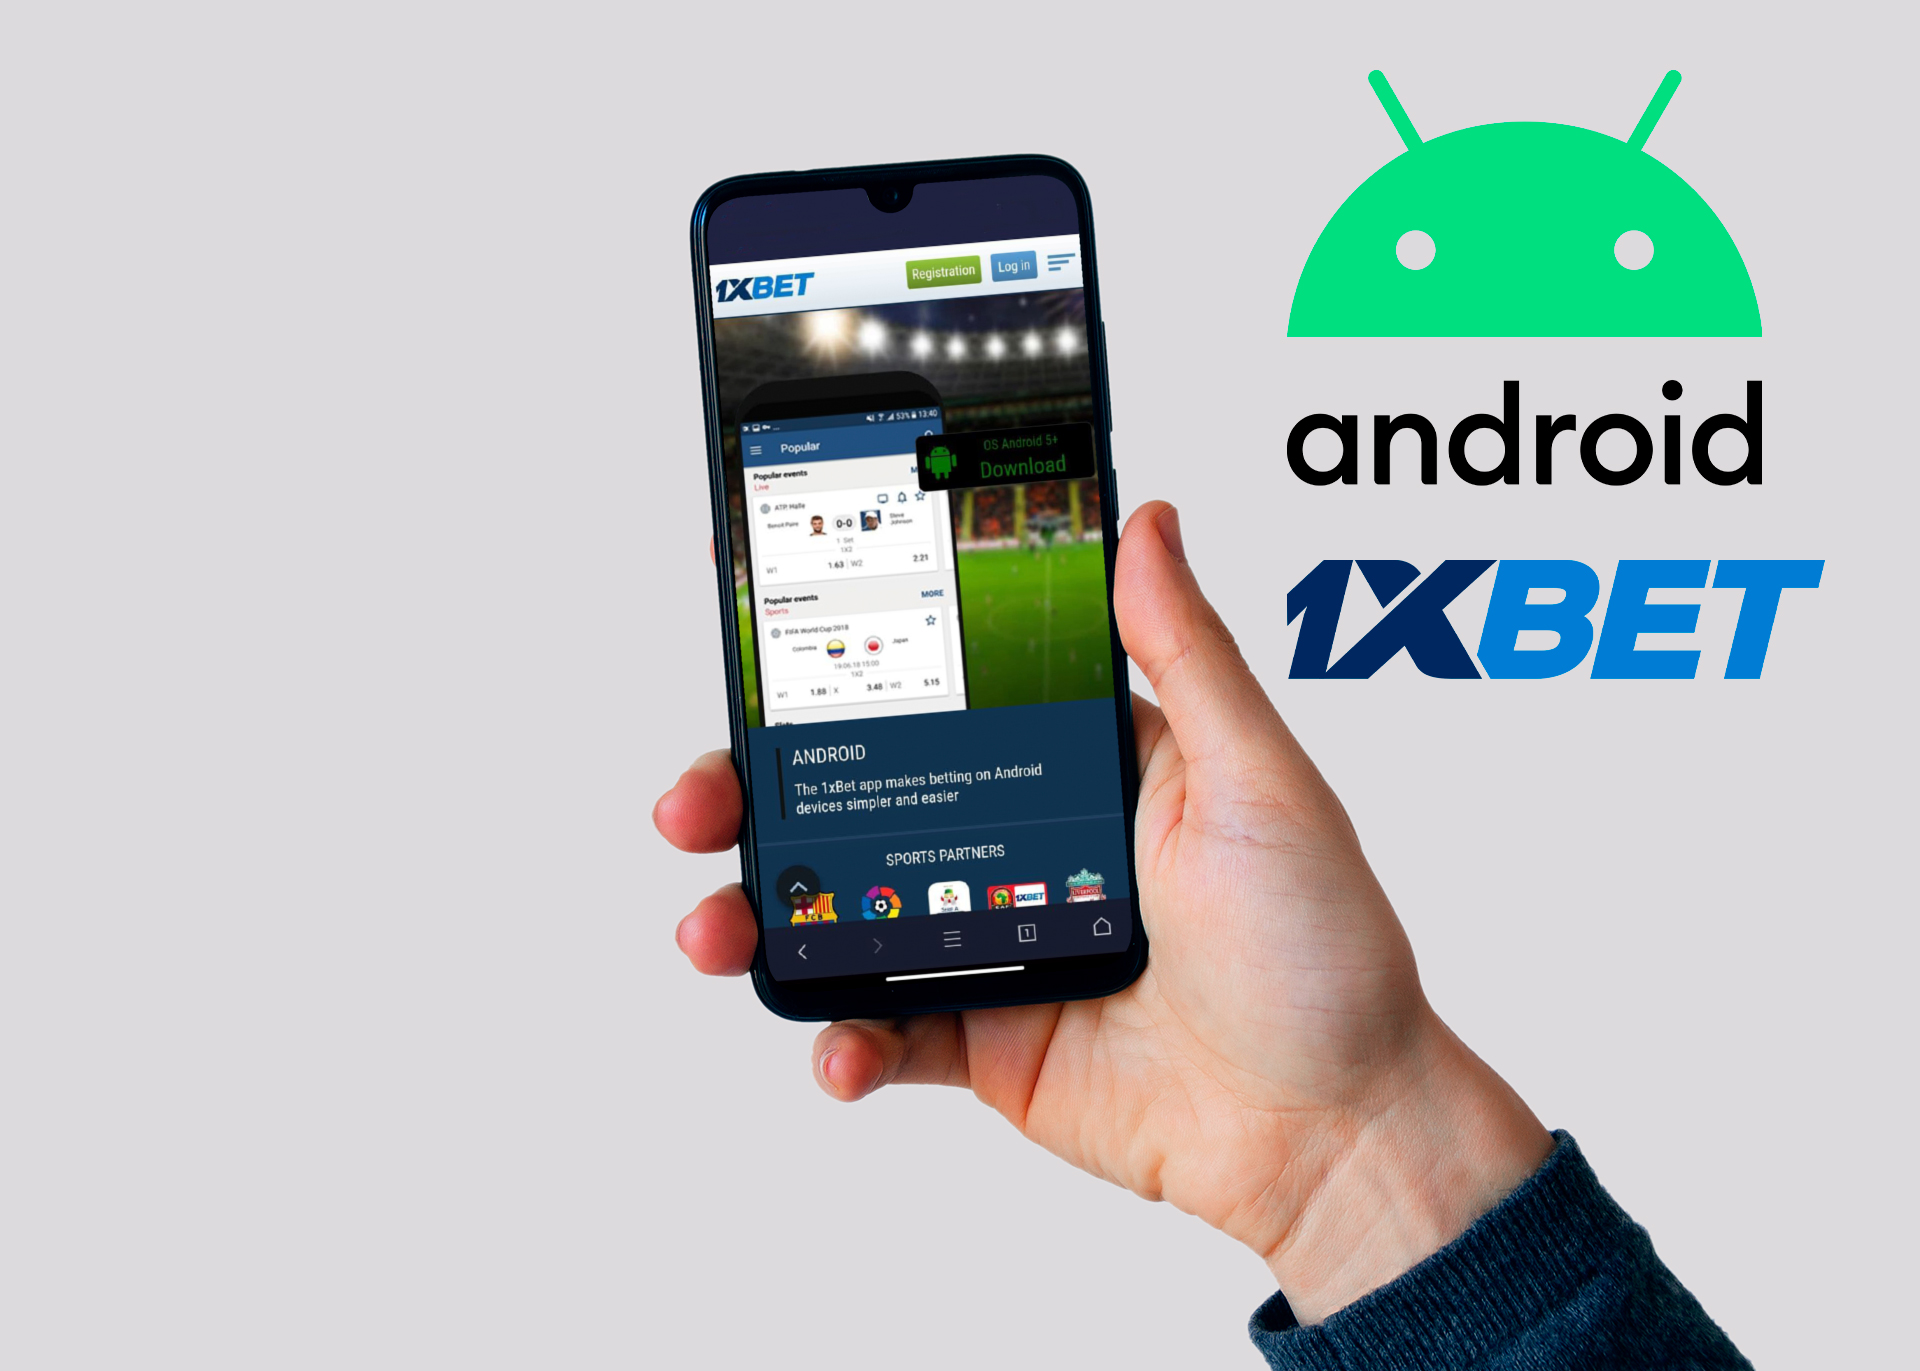 Download the Android app to register in 1xbet.